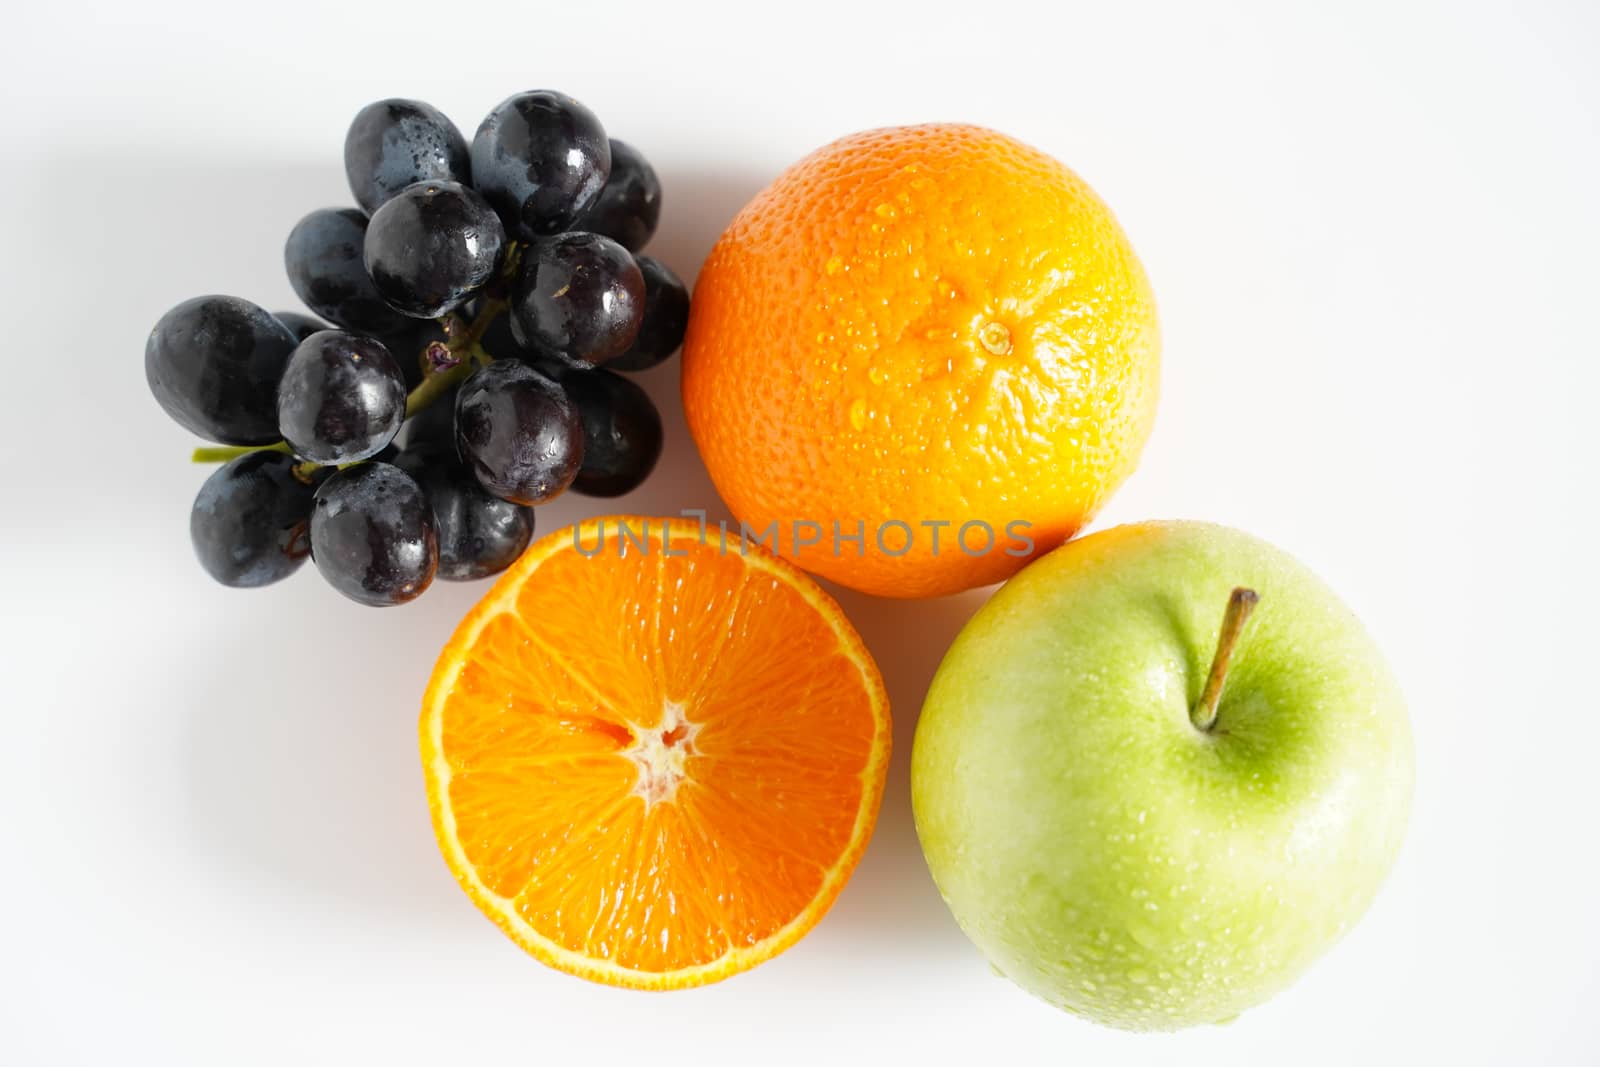 An Apple, Orange and Grapes by samULvisuals